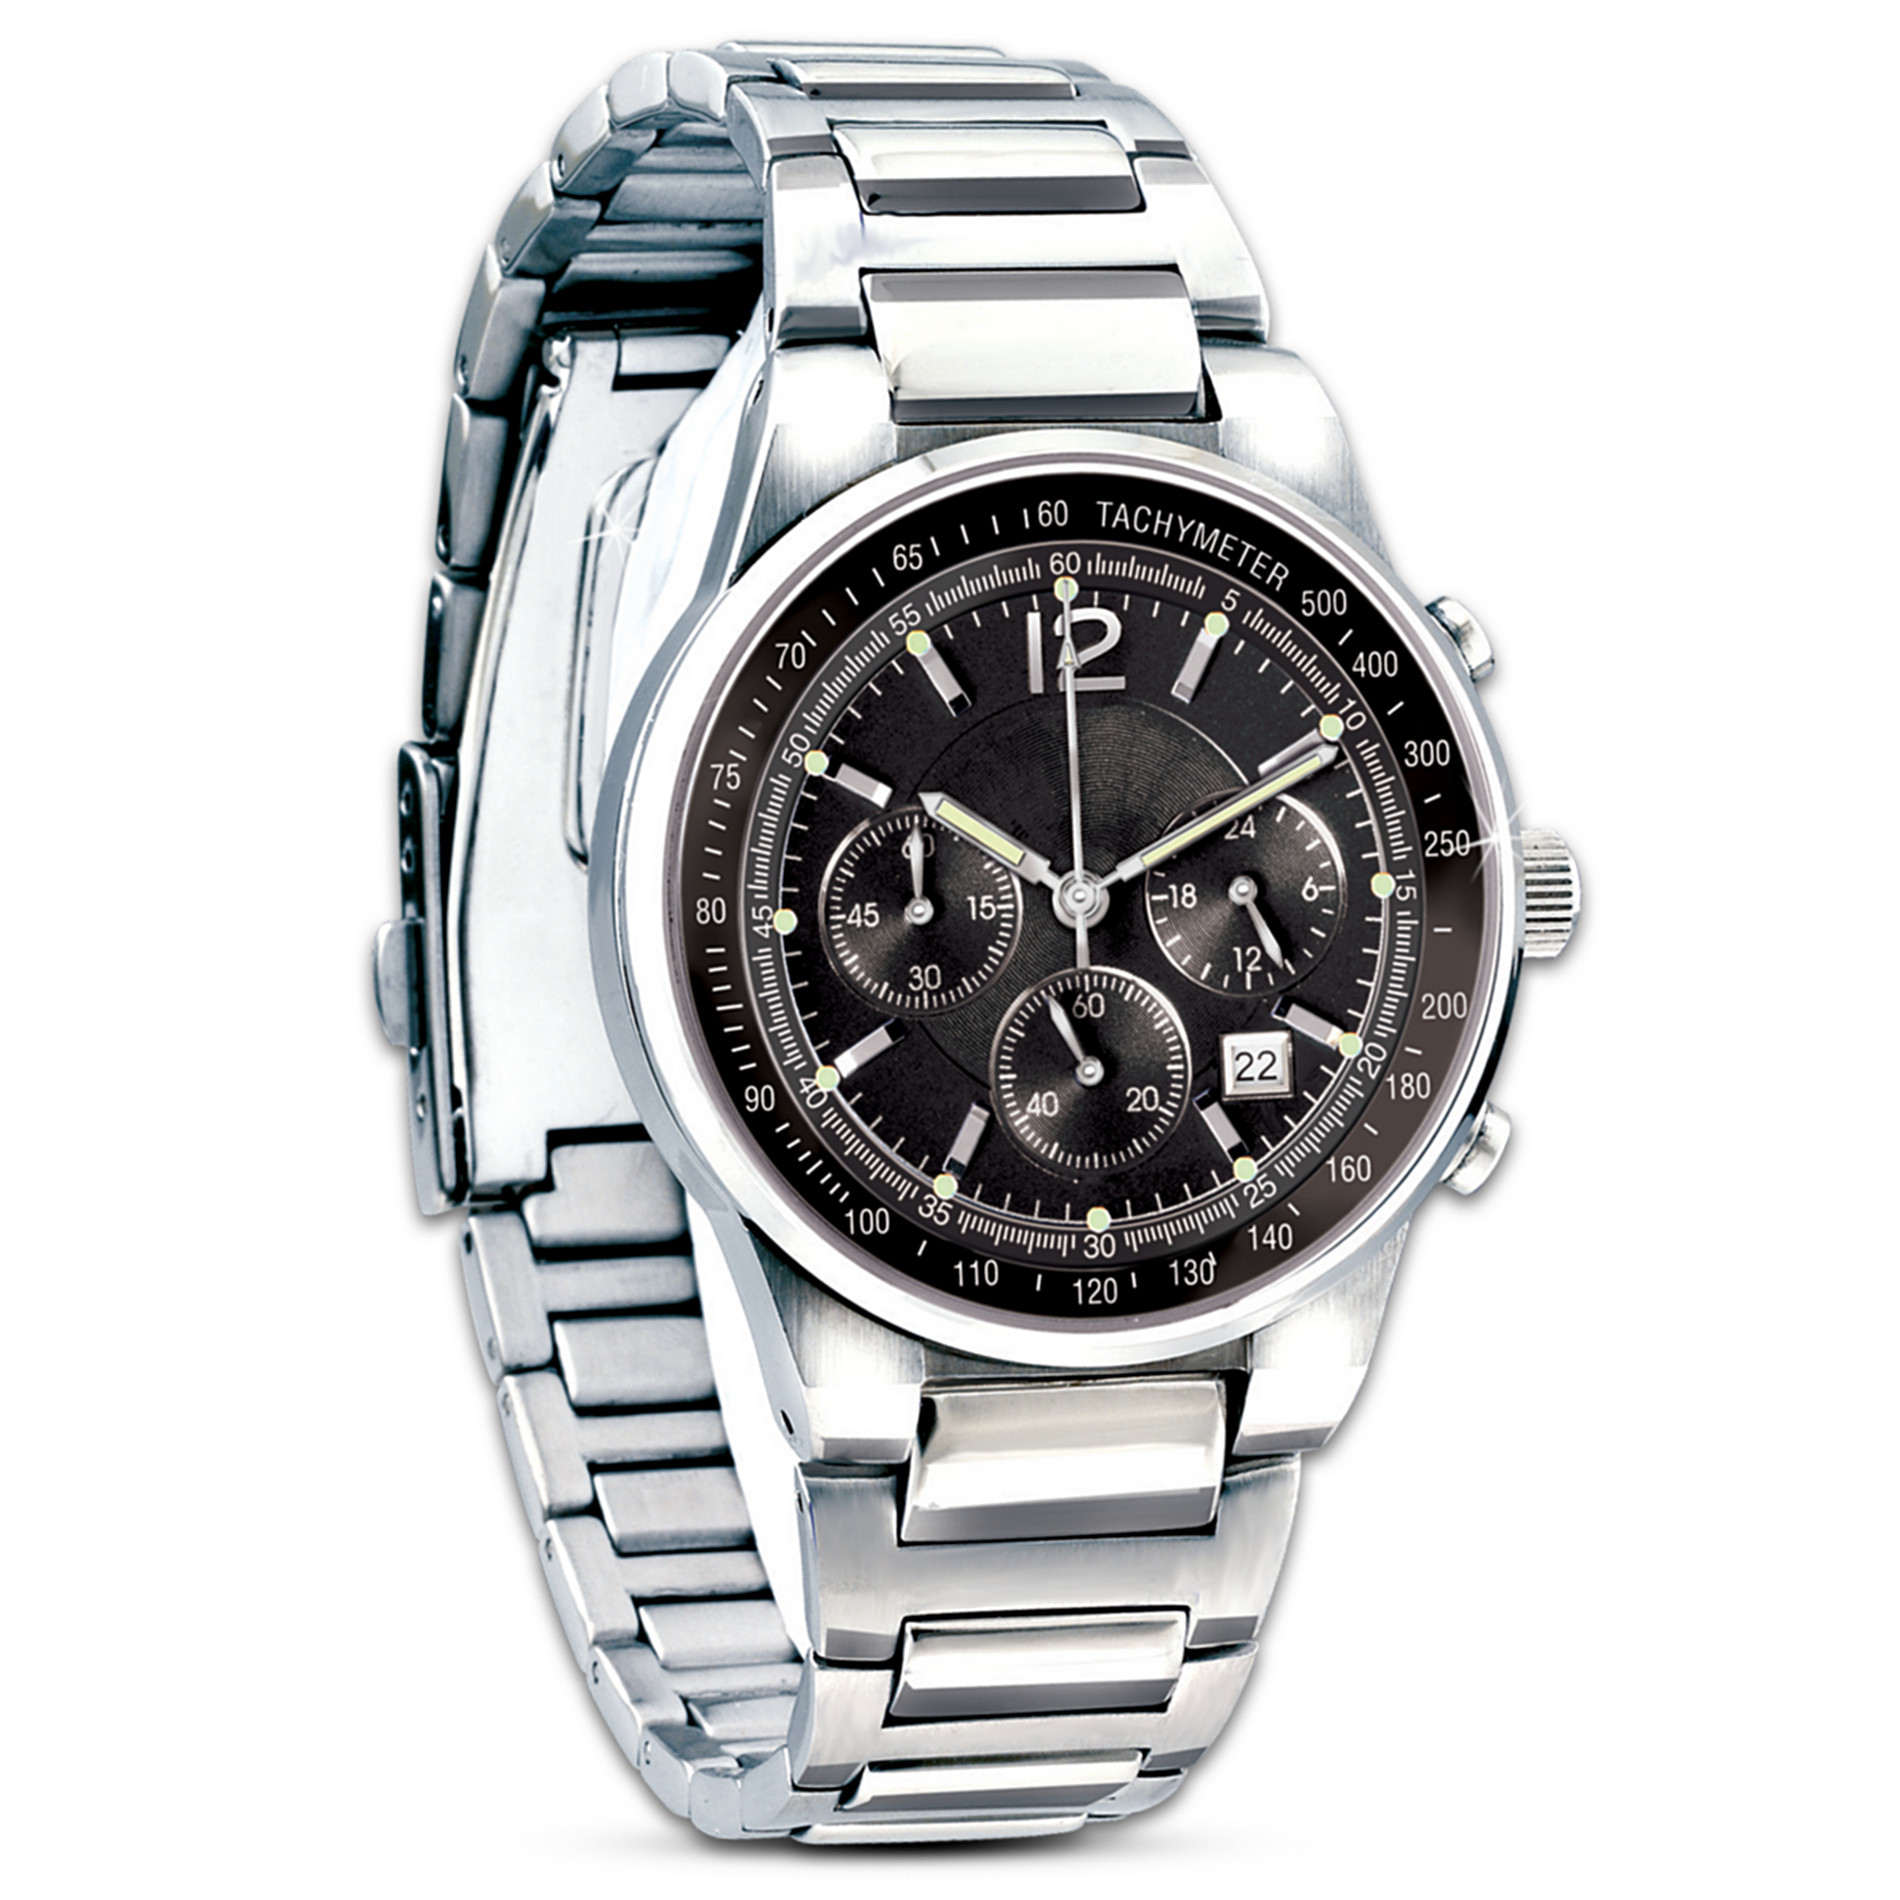 ... Steel Chronograph Men's Wrist Watch: Gift For Sons at Sears.com